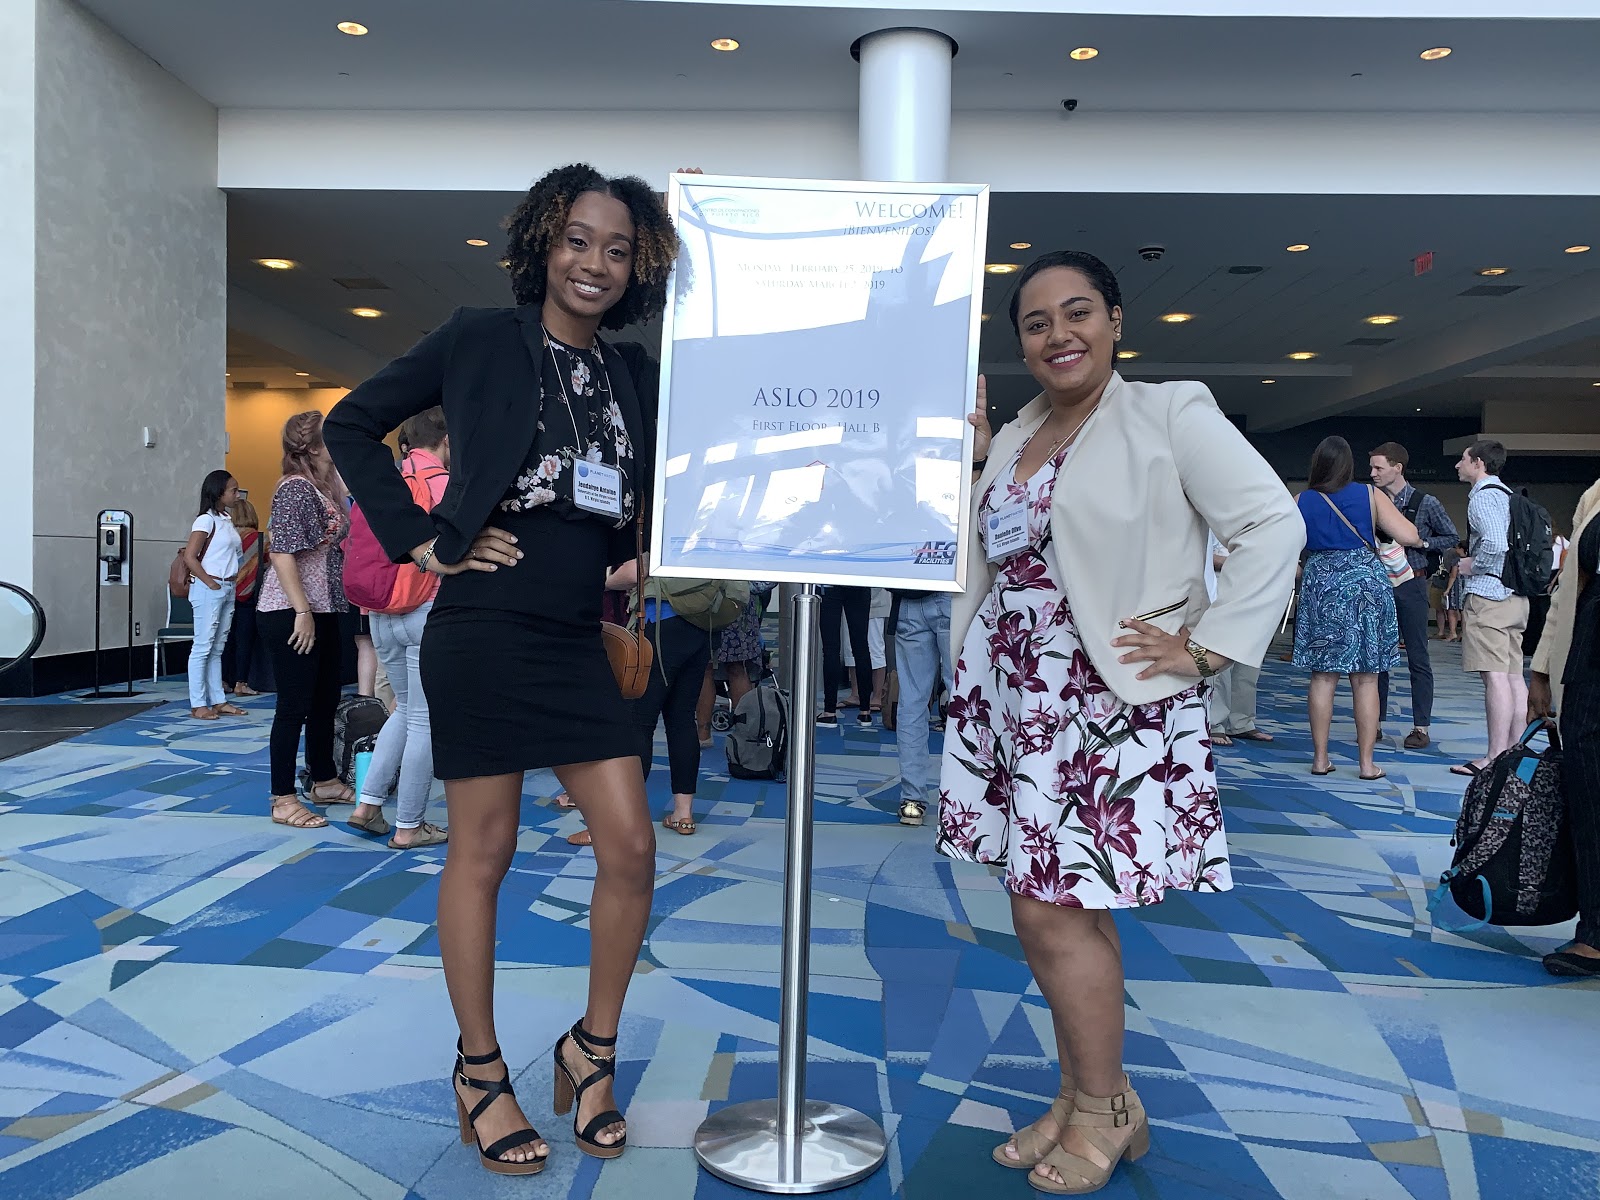 Jendahye Antoine (left) and Danielle Olive (right) are both current NOAA Educational Partnership Program with Minority Serving Institutions (EPP/MSI) undergraduate scholars, class of 2018 and 2017, respectively. They attend the University of the Virgin Islands in St. Thomas, and were able to attend the 2019 ASLO Aquatic Sciences Meeting in beautiful San Juan, Puerto Rico. With support from the EPP/MSI, they were given the opportunity to attend and present at this year’s ASLO conference.